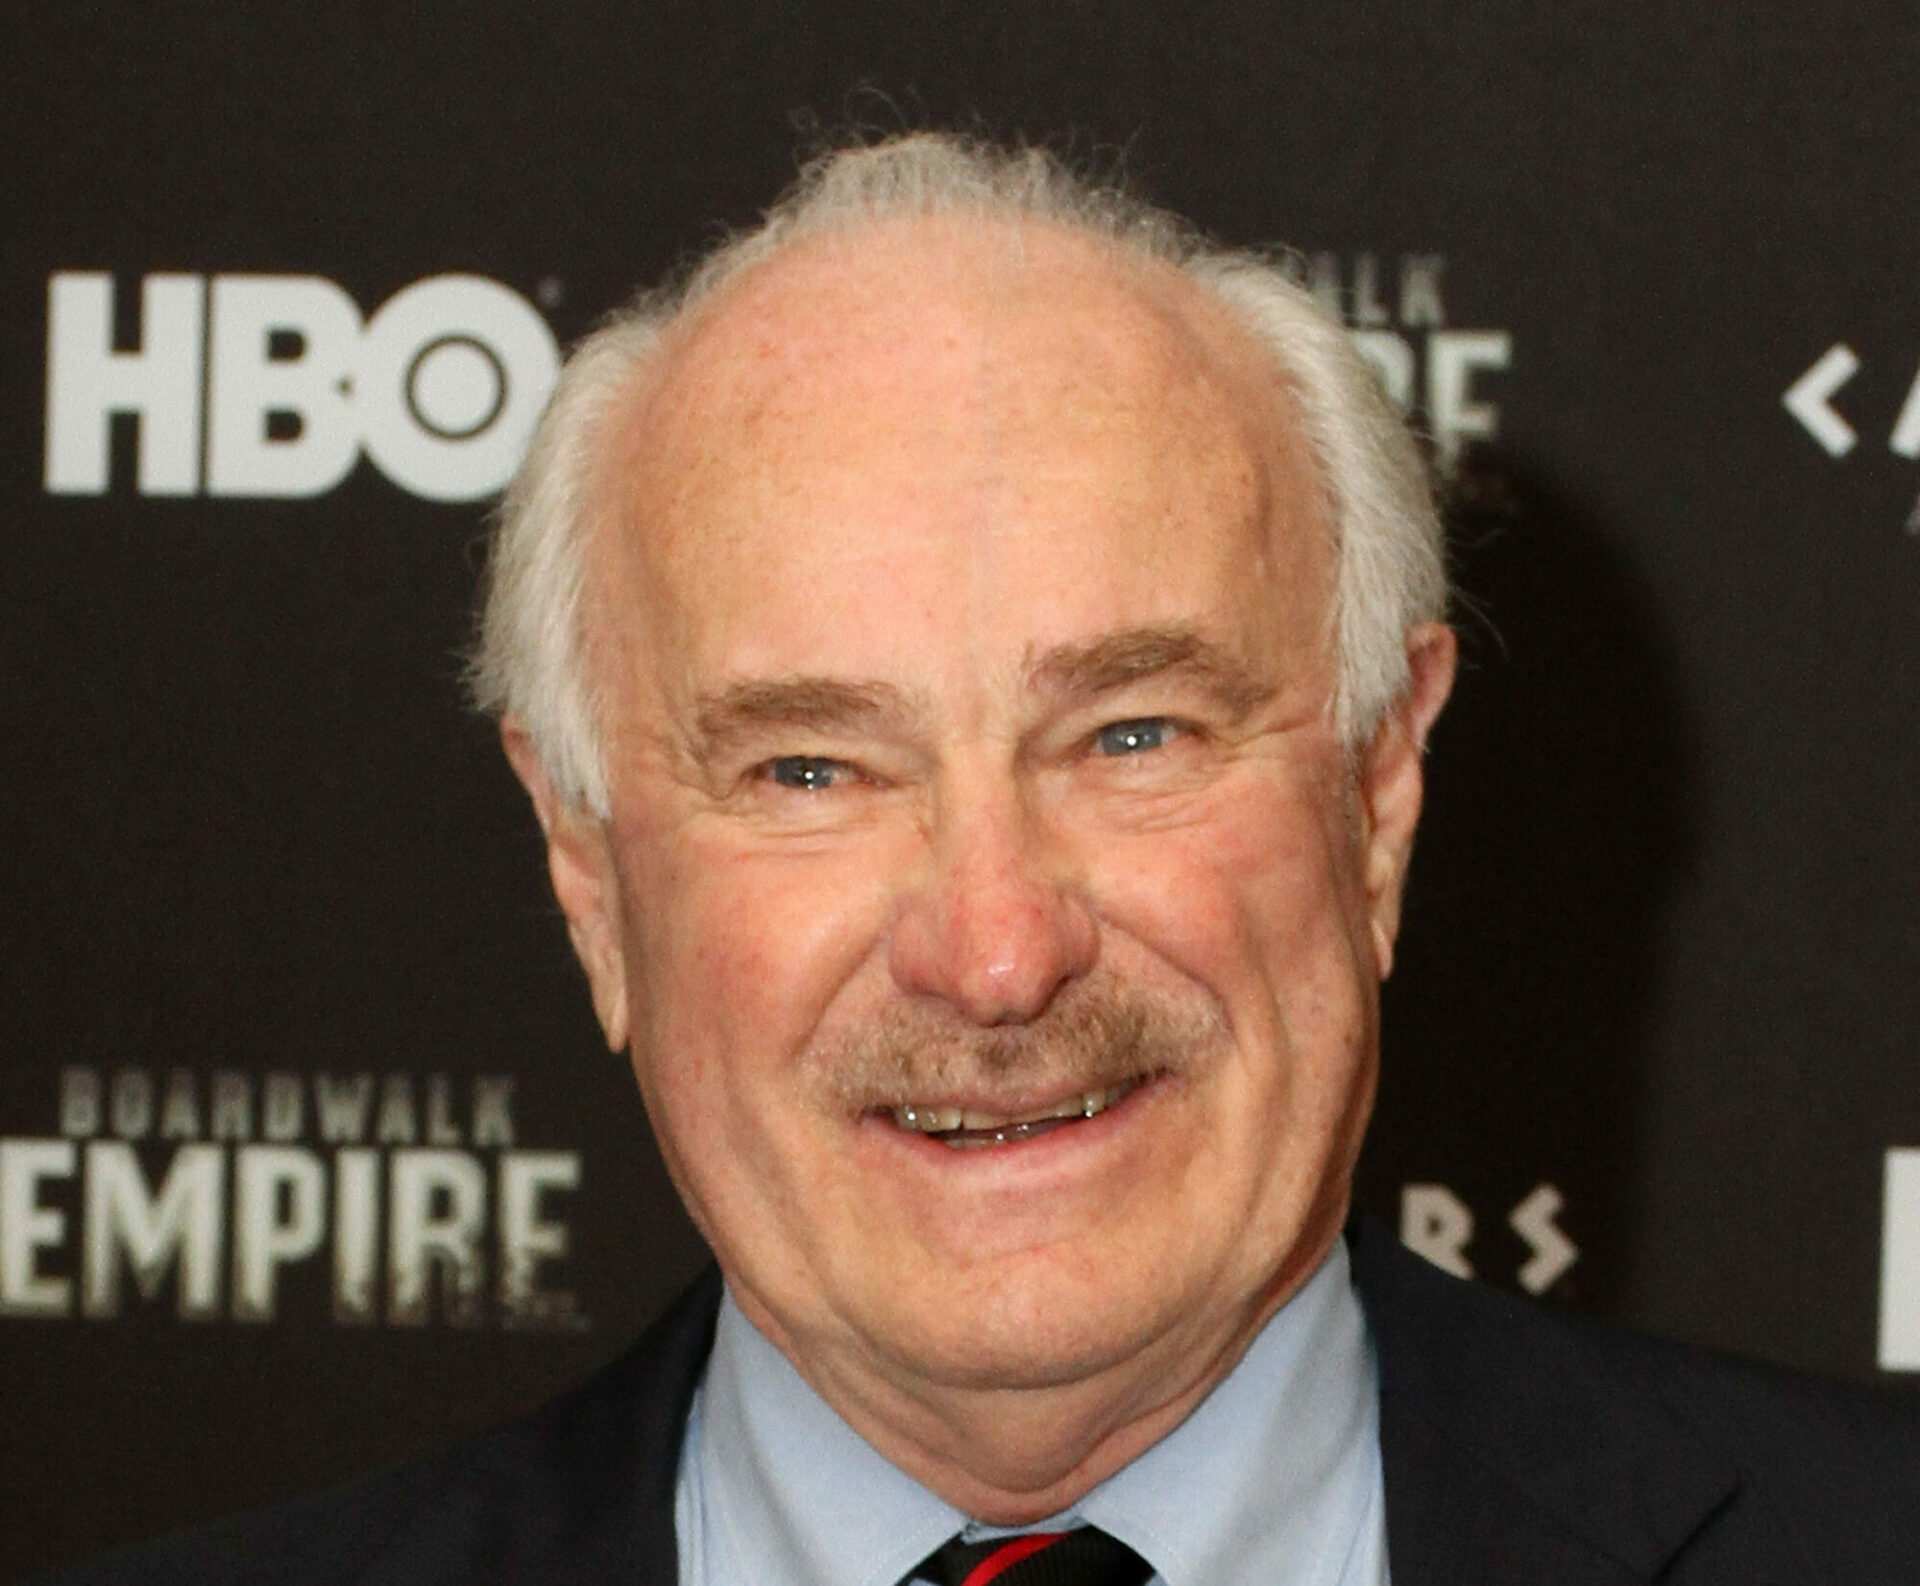 Dabney Coleman, the bad boss of ‘9 to 5’ and ‘Yellowstone’ guest star, dies at 92